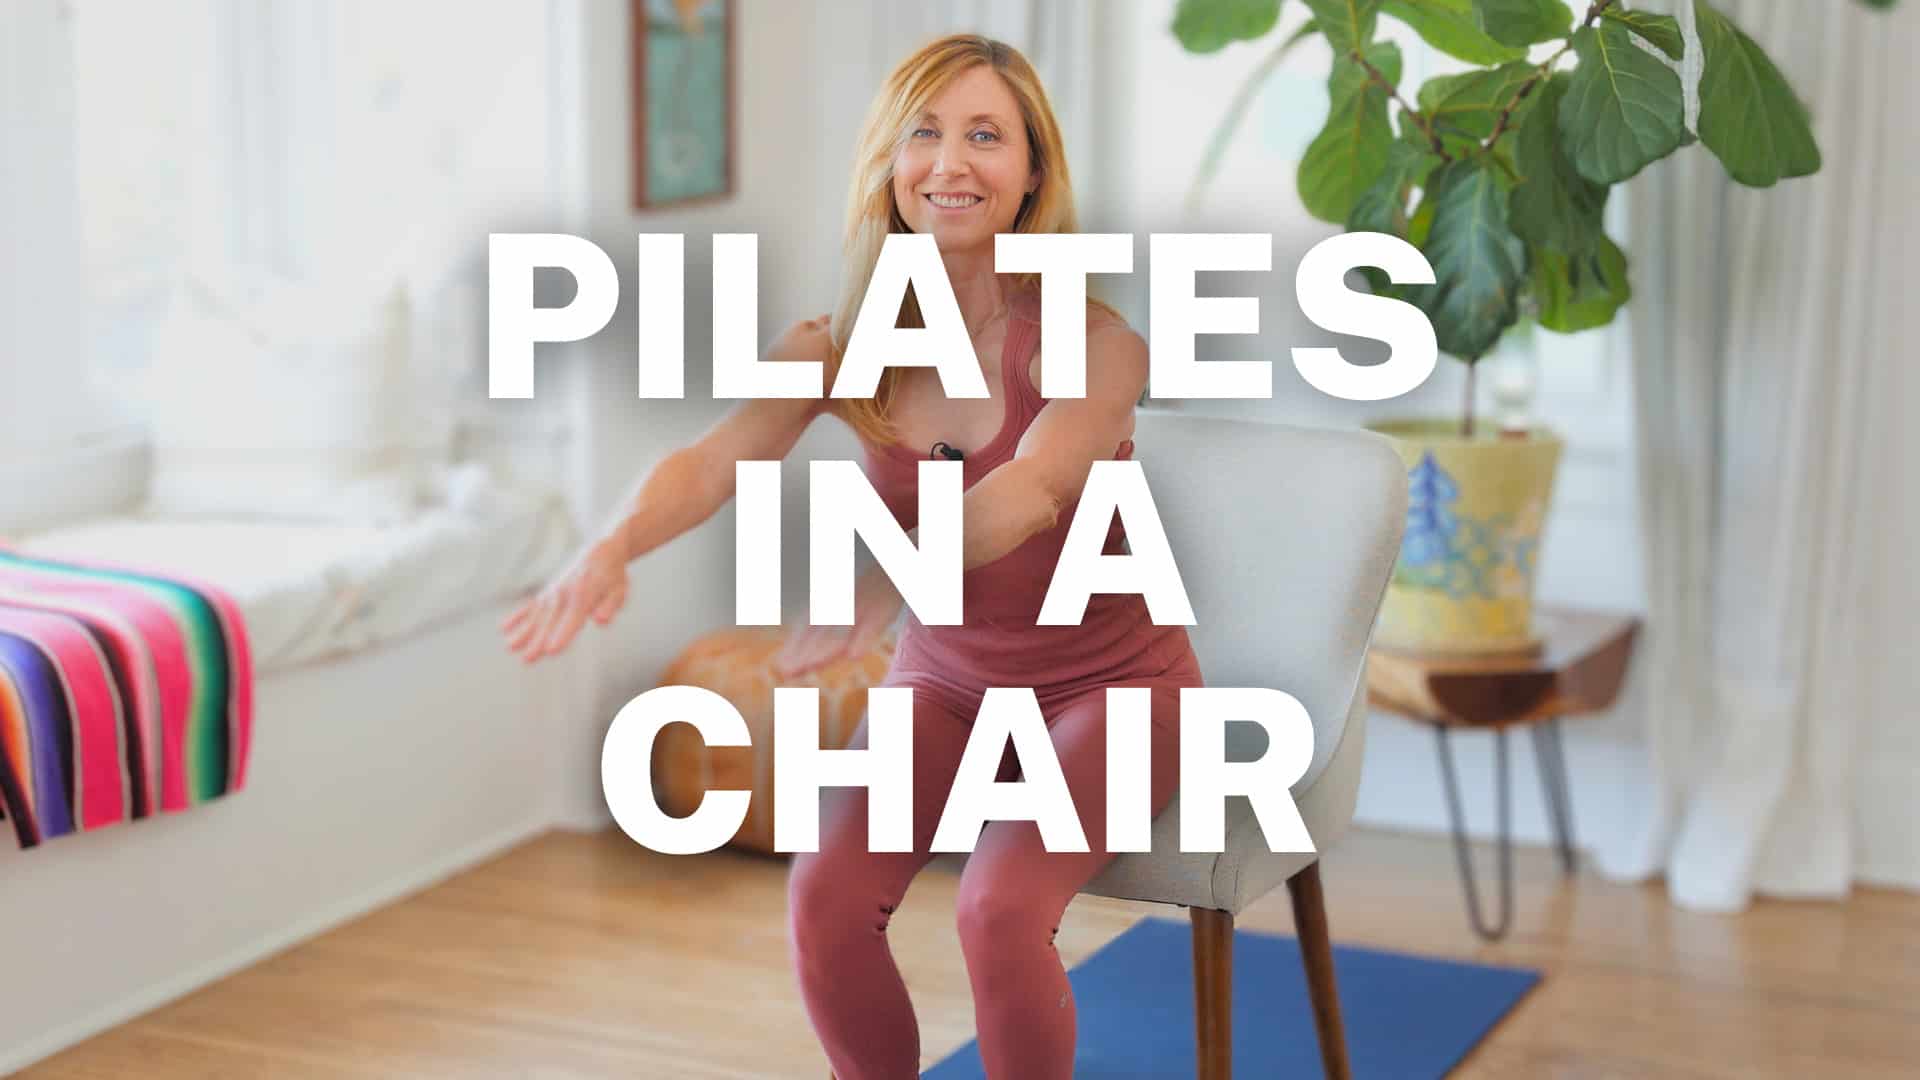 Pilates Workouts in a Chair